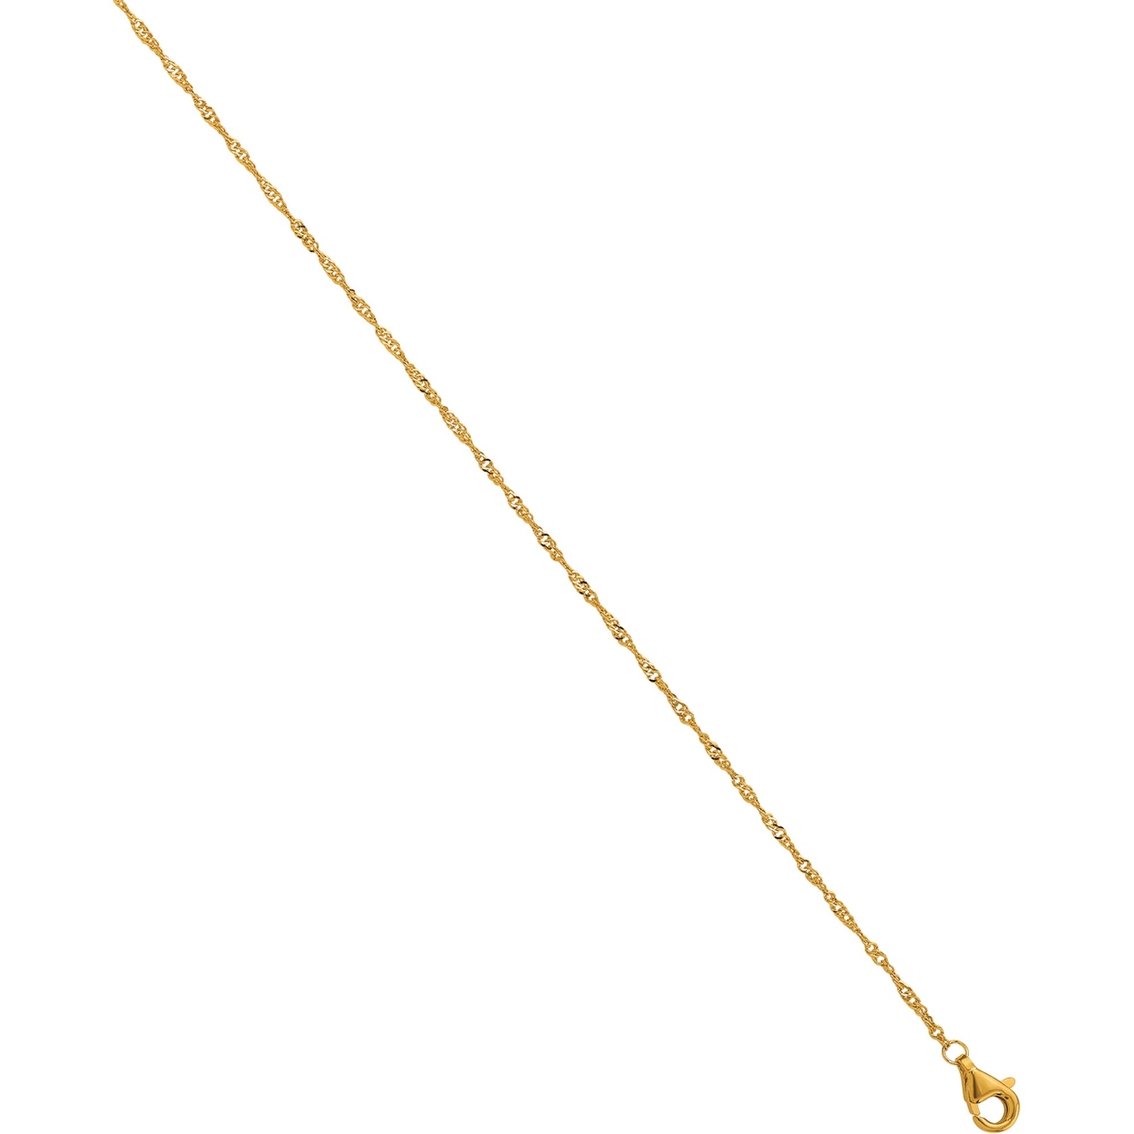 24K Pure Gold 1.6mm Singapore Chain Necklace - Image 3 of 7